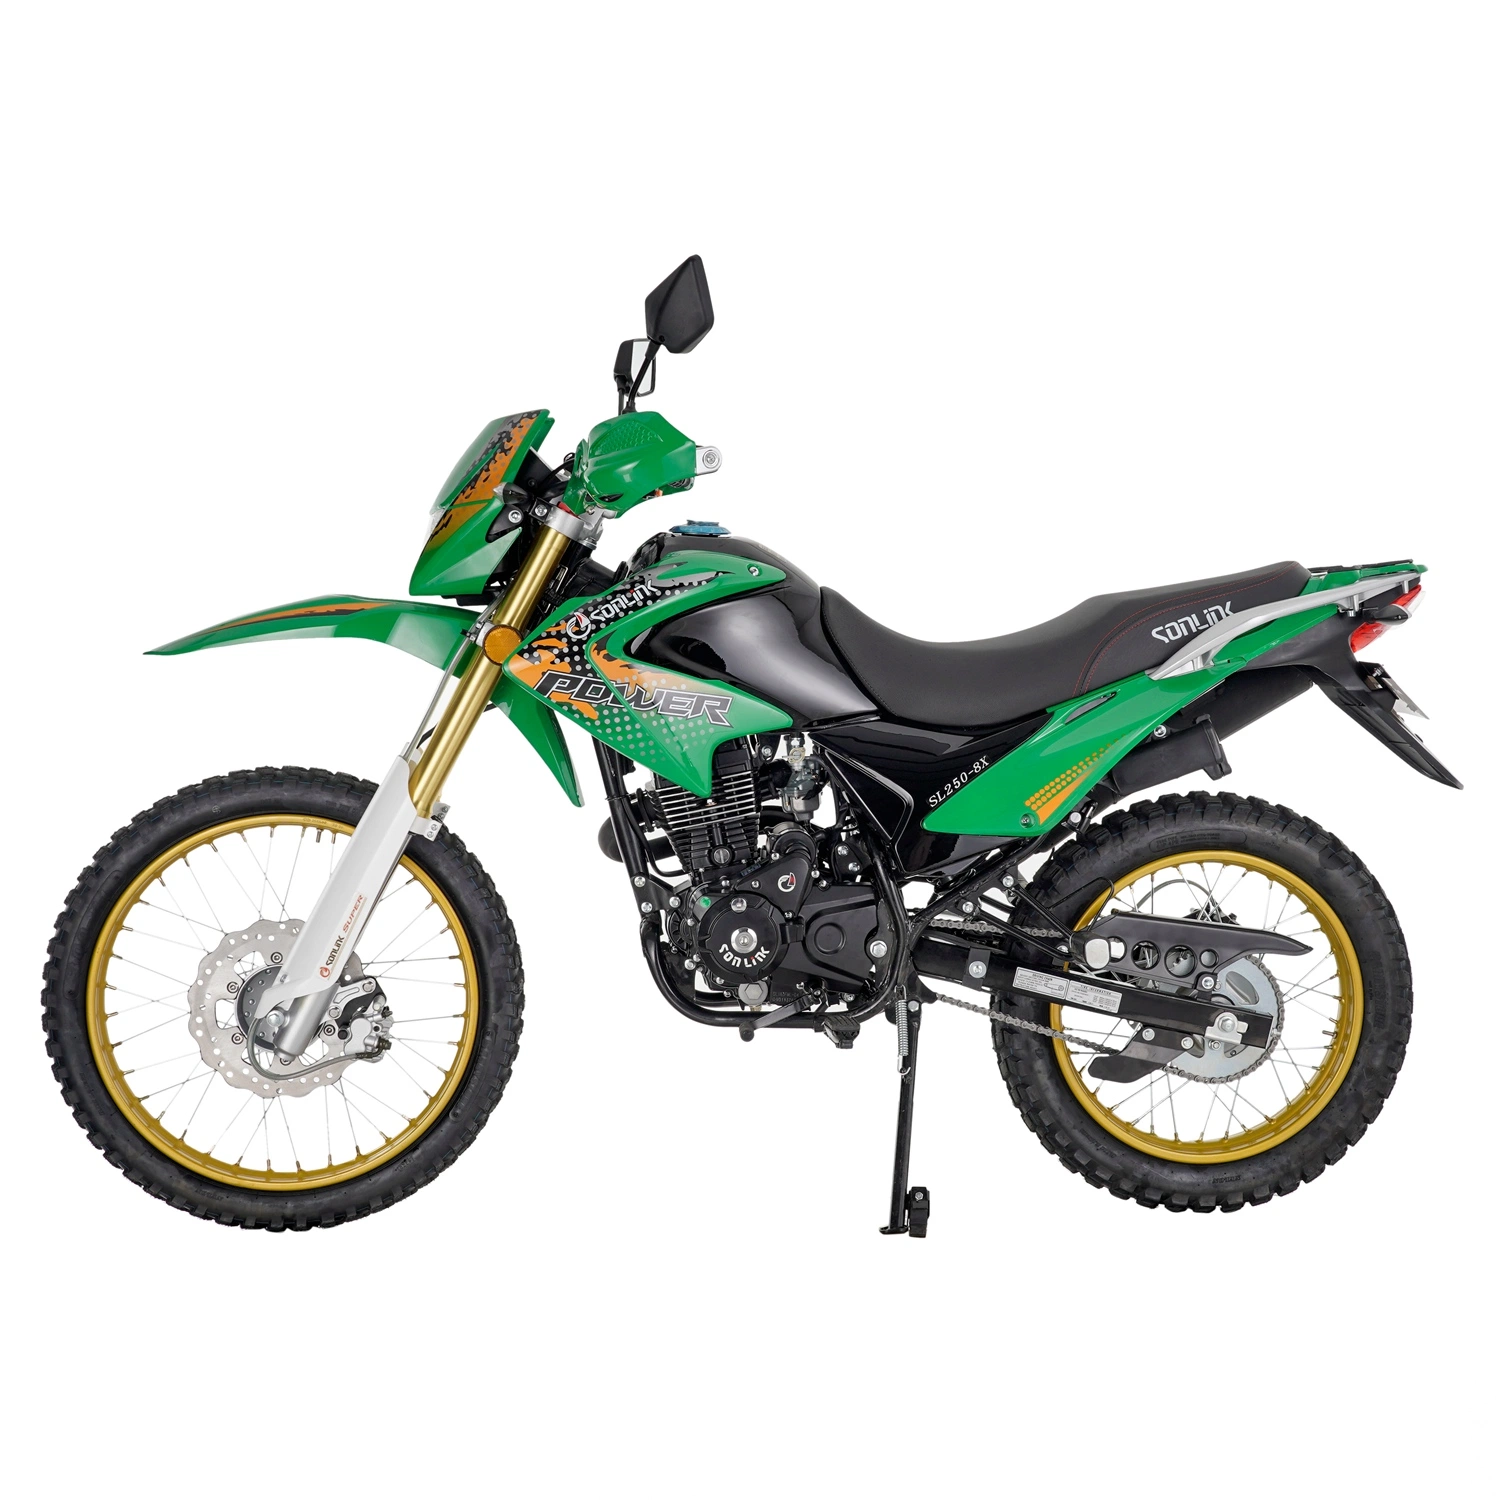 Quality 200cc/250cc Powerful Sport Motorcycle/Street Bike/Dirt Bike/off Road Motorcycle for Sale